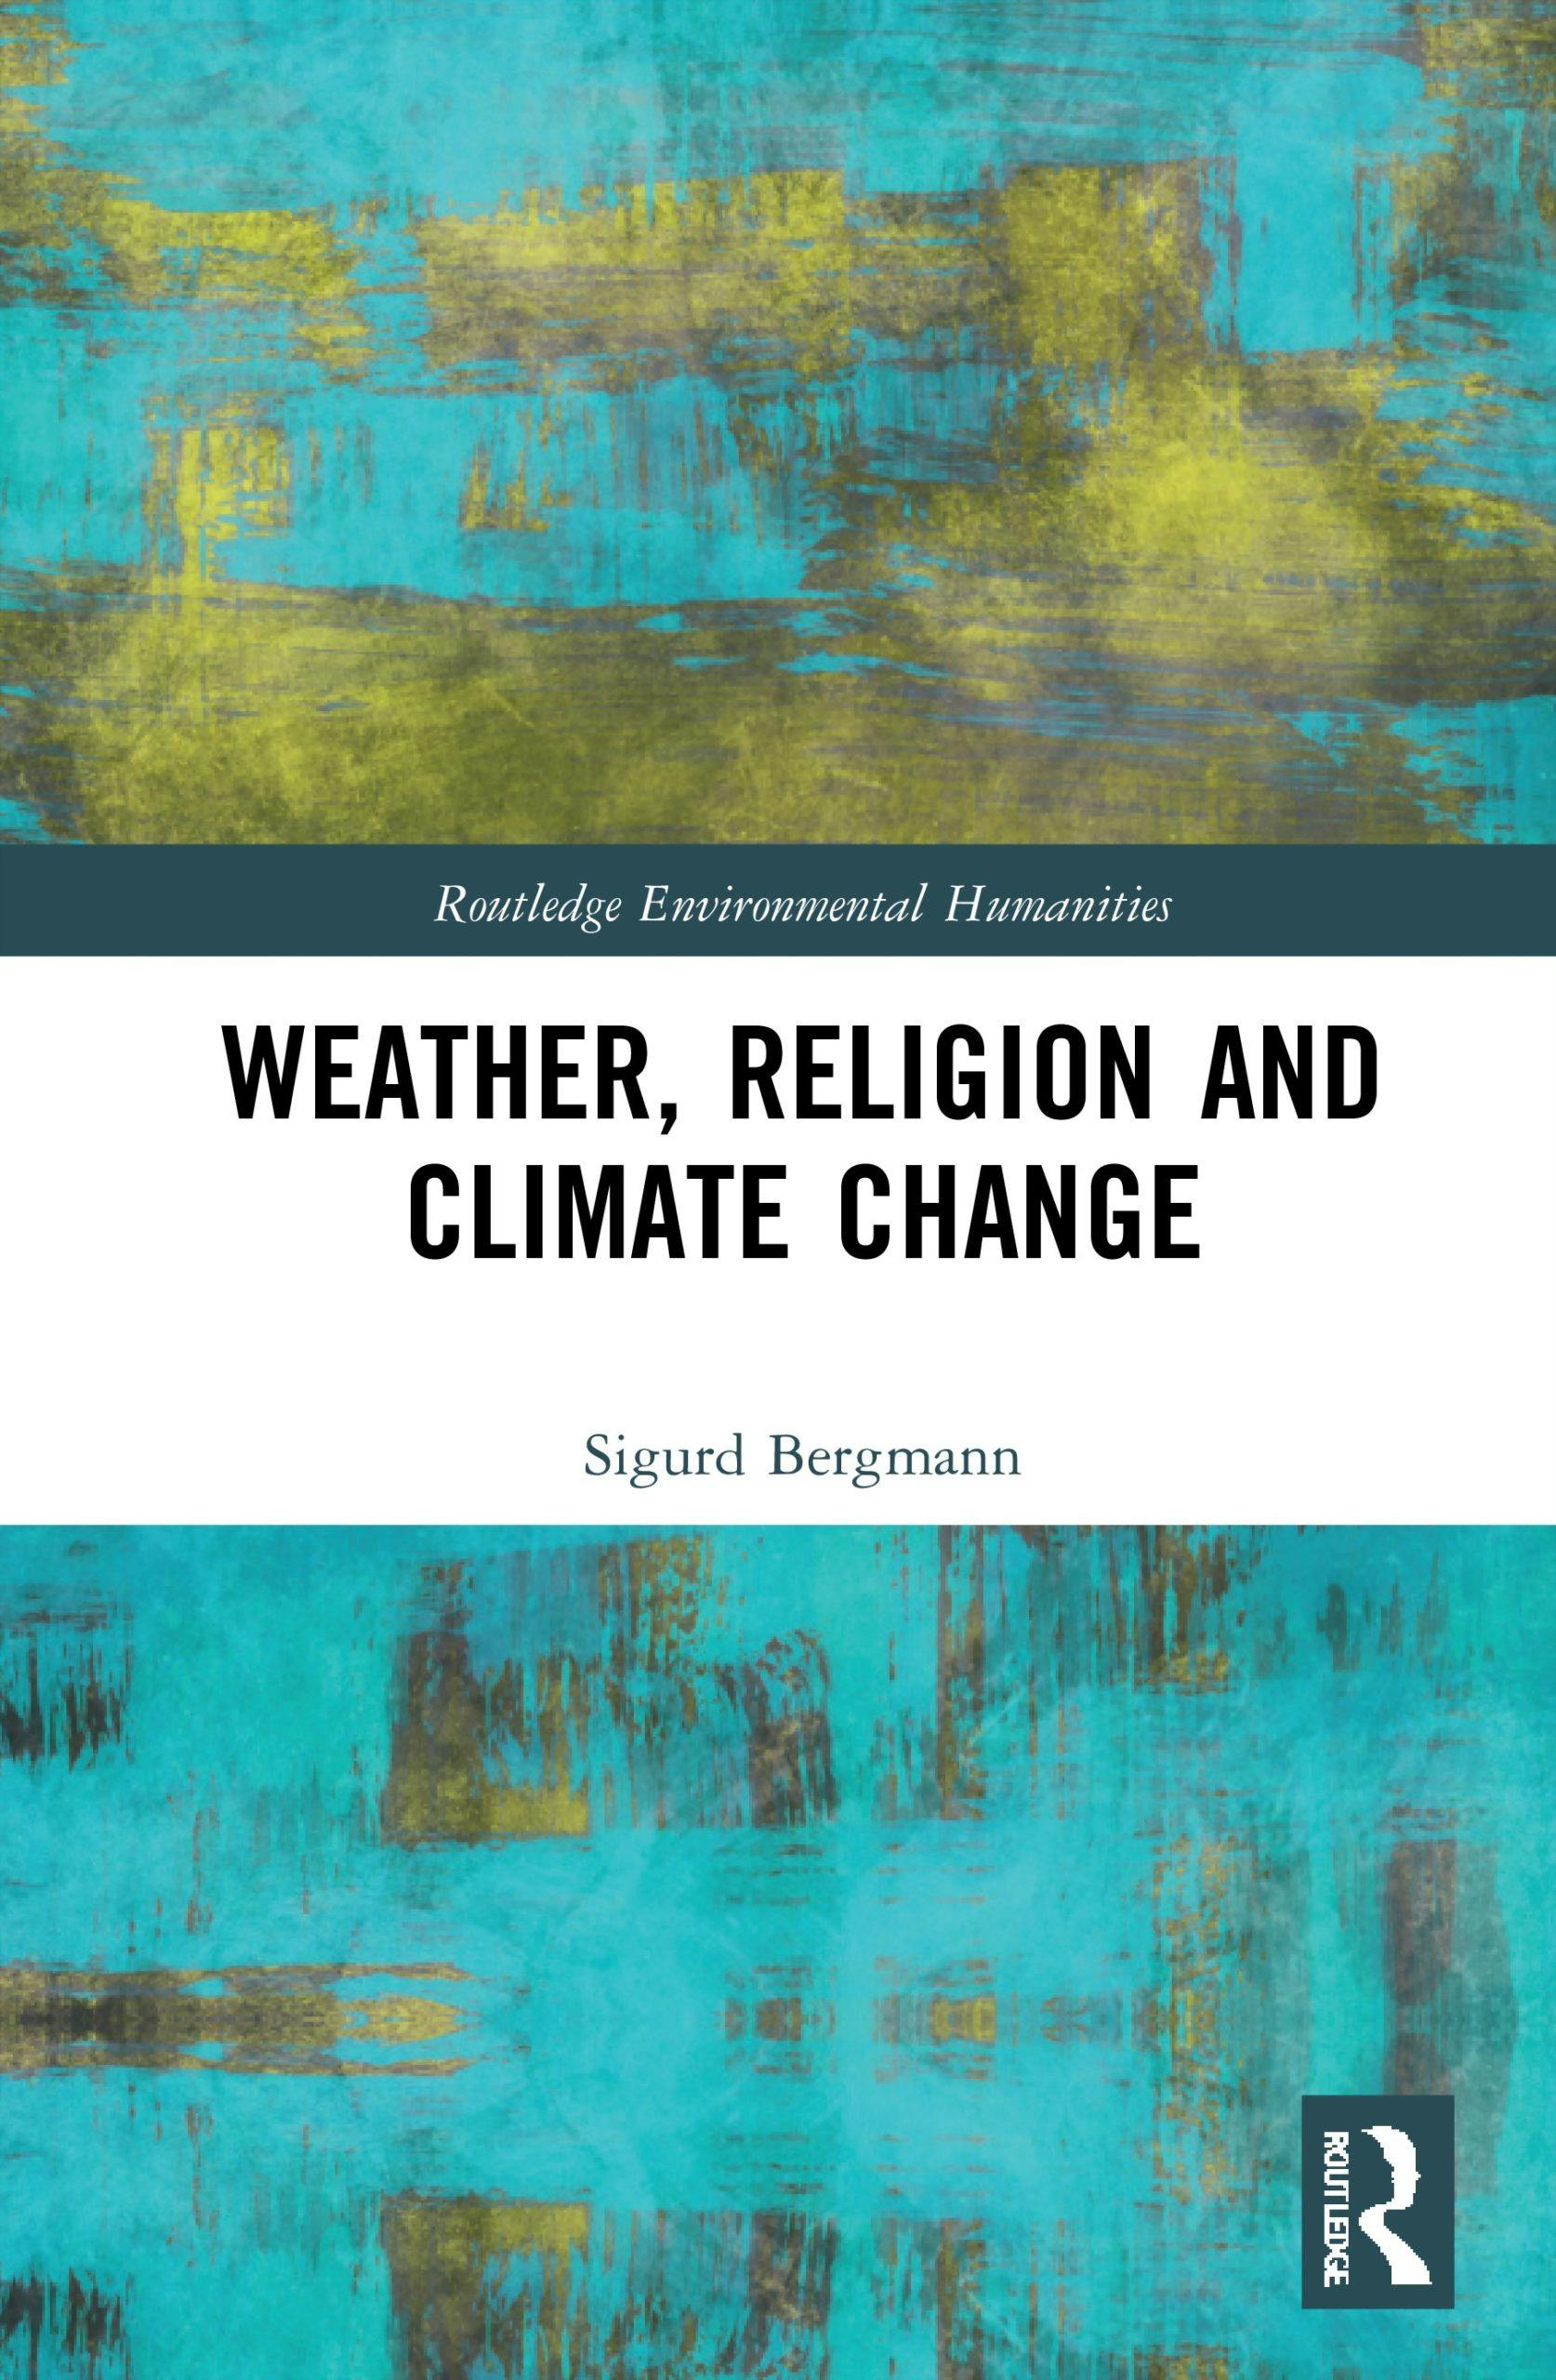 Sigurd Bergmann: Weather, Religion and Climate Change. 2021